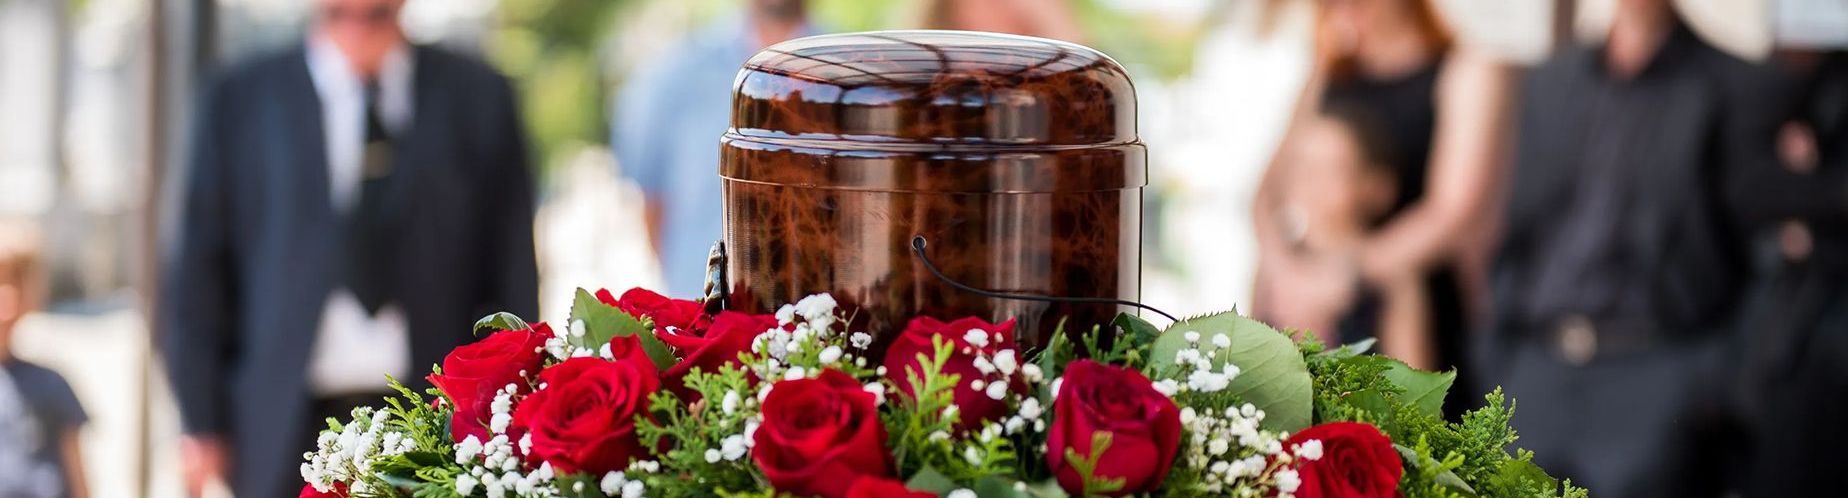 a urn is surrounded by red roses and baby 's breath at a funeral .